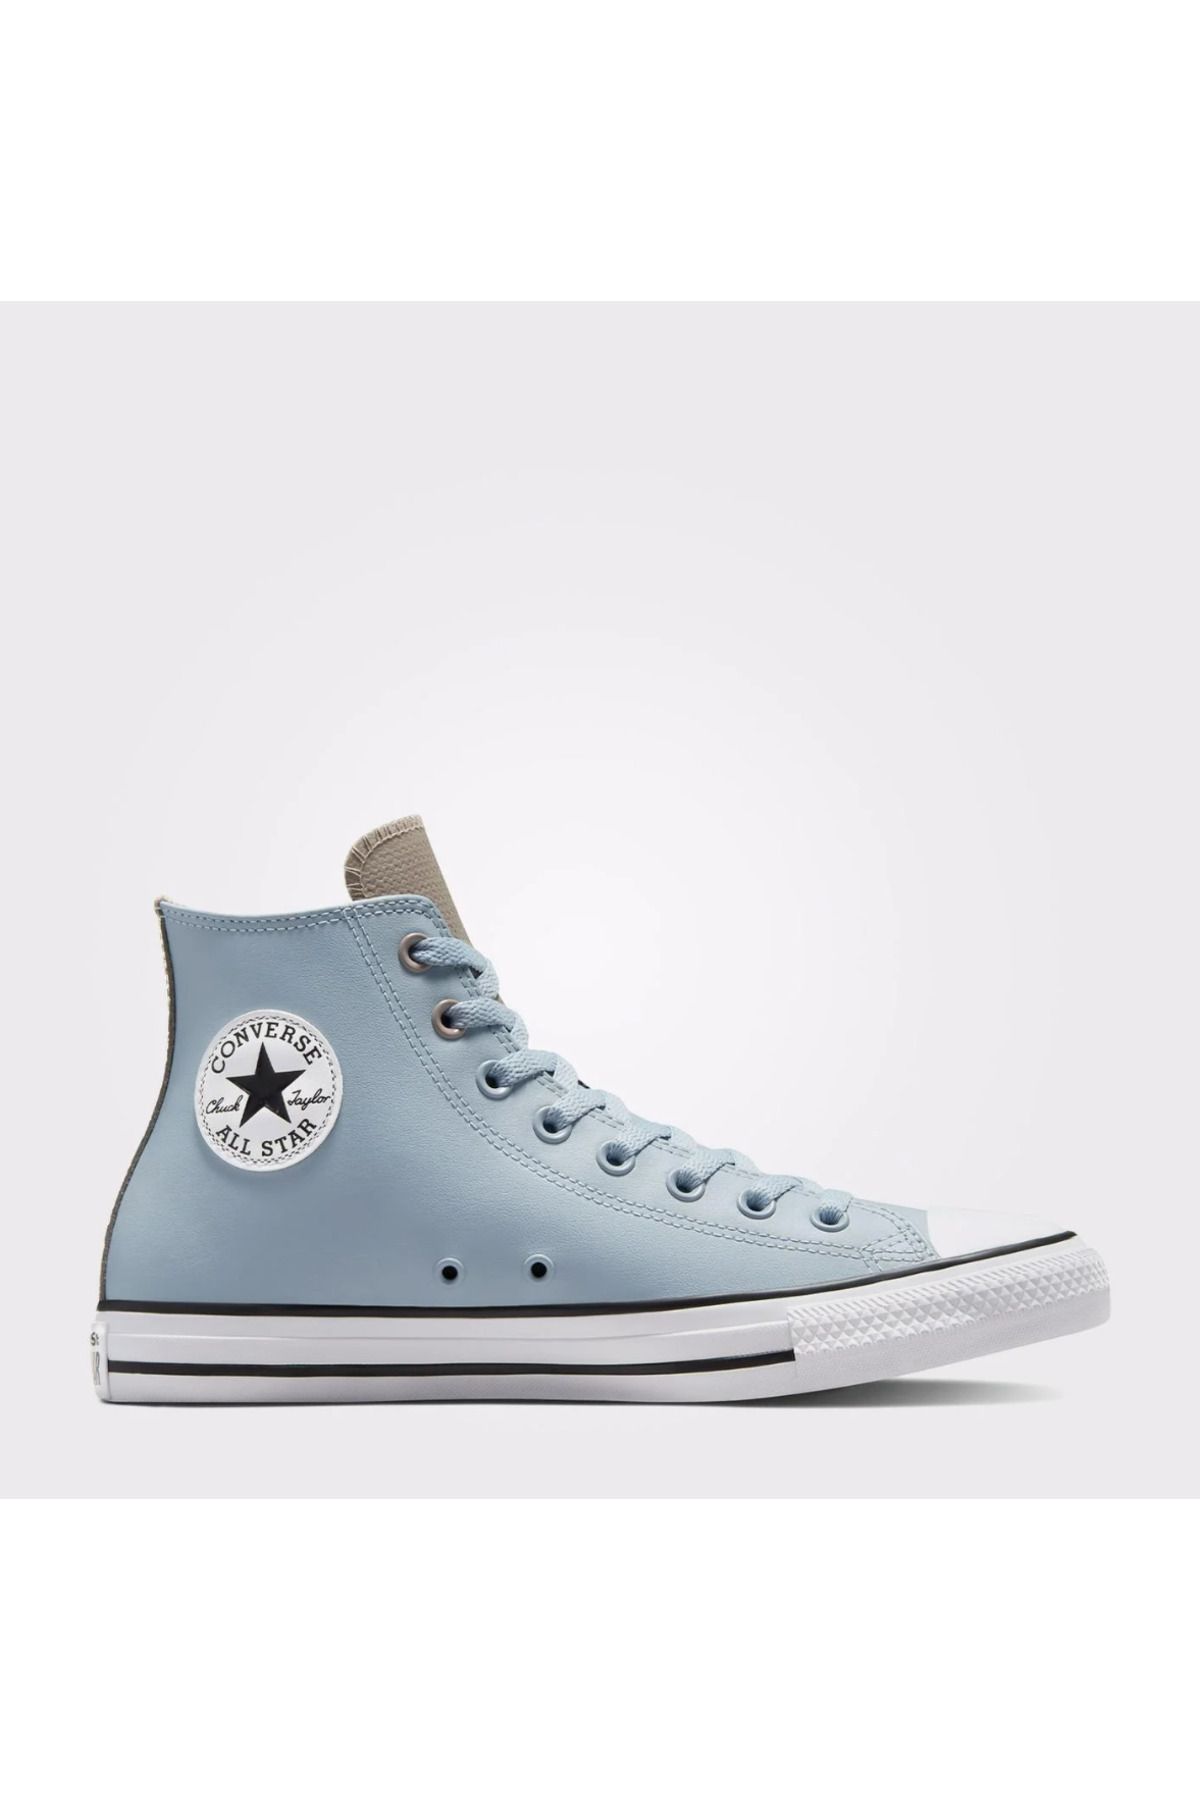 Converse Chuck Taylor All Star Fall Leather